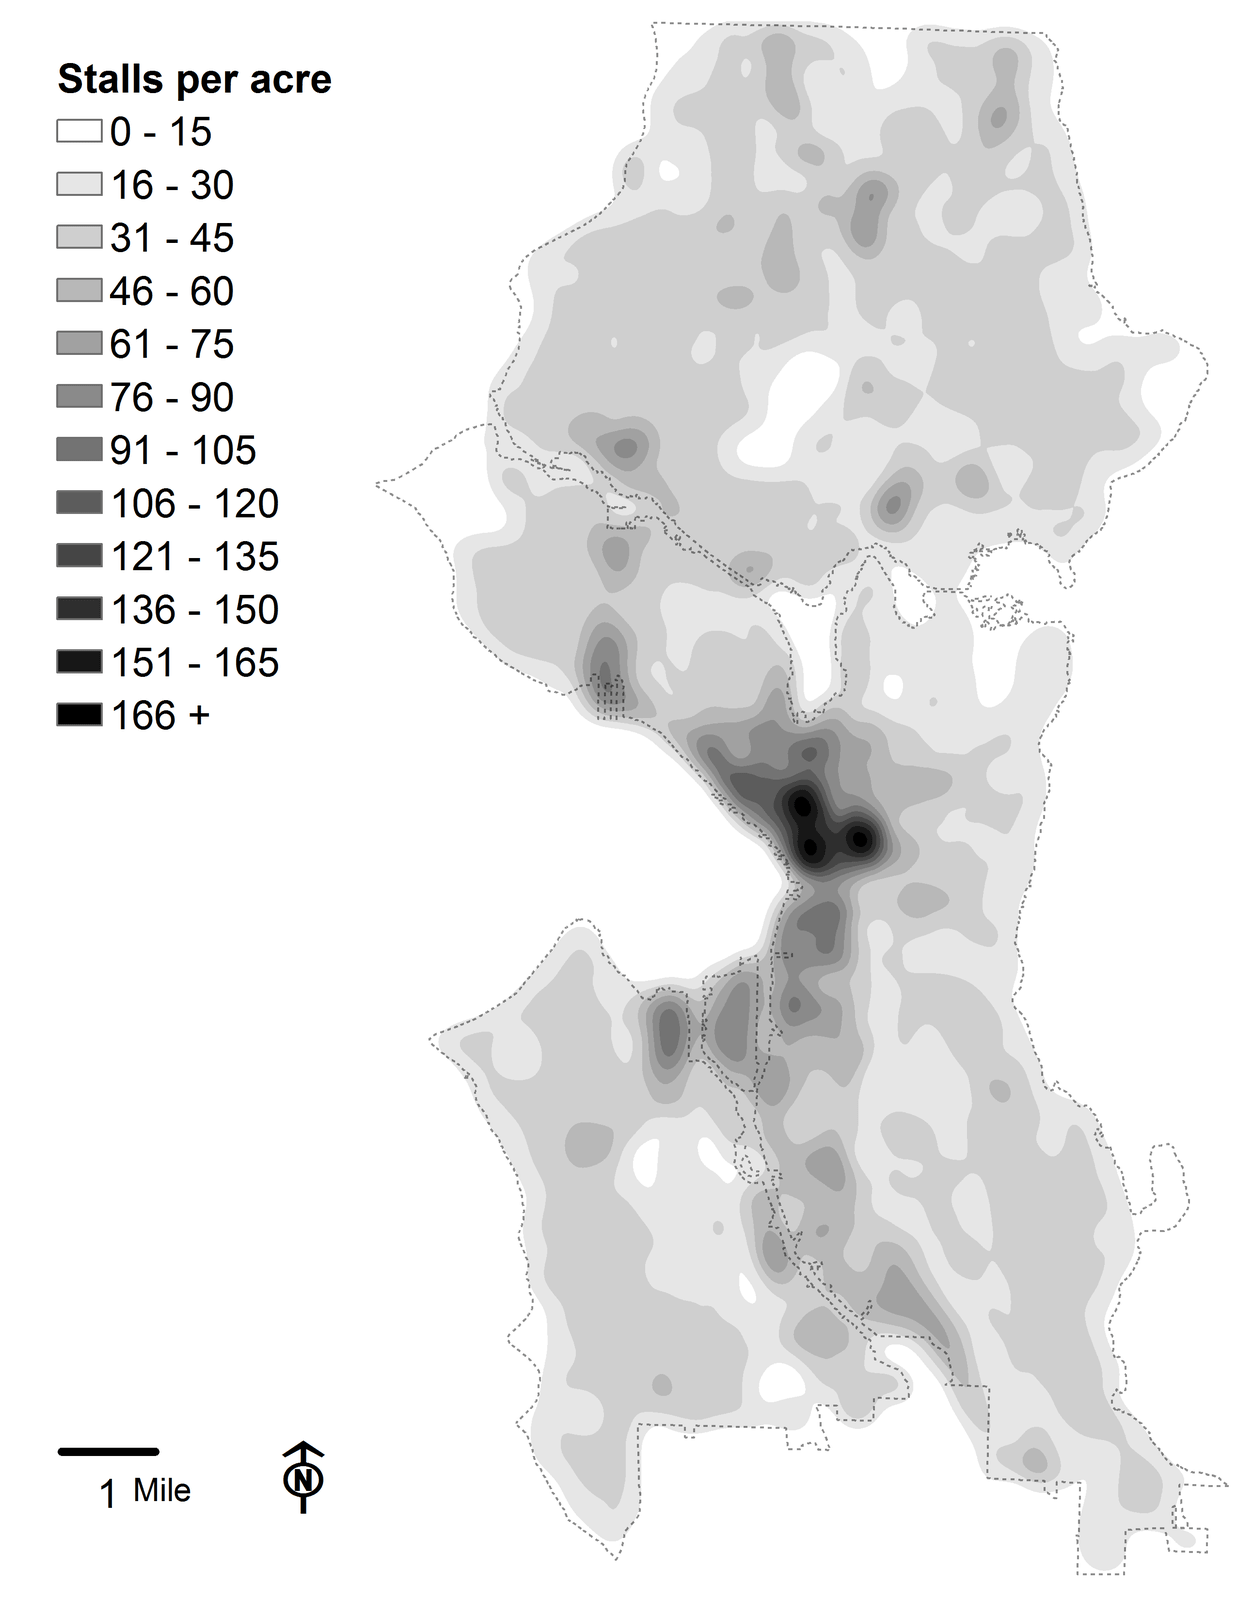 High-resolution map of parking density in Seattle